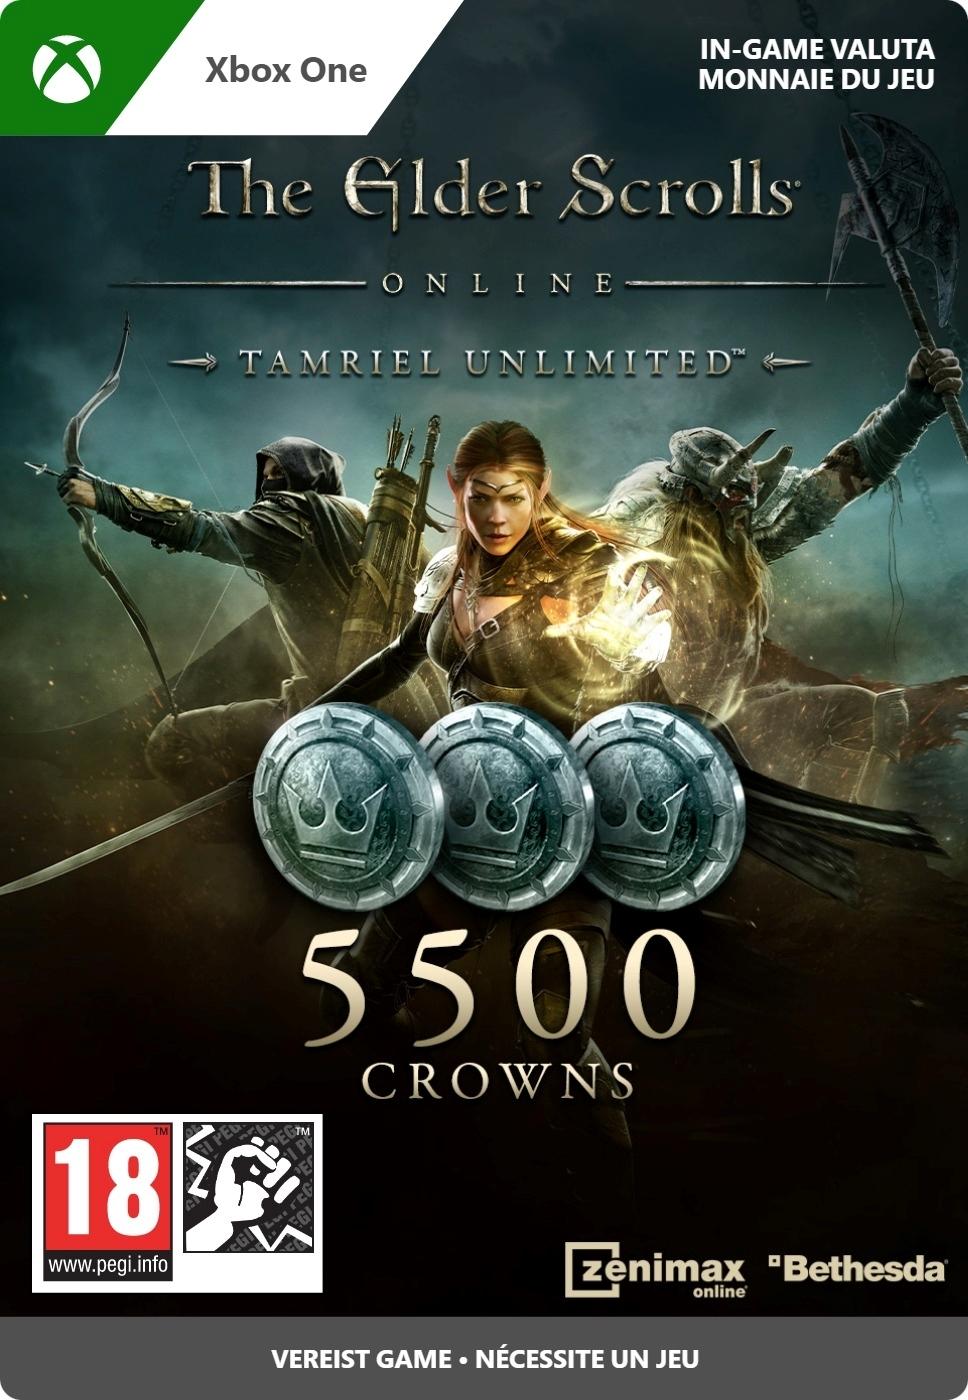 The Elder Scrolls Online: Tamriel Unlimited Edition: 5500 Crowns - Xbox Series X/Xbox One - Curr | 7LM-00056 (d48a9c40-5aee-0345-a35c-8b190bbe96fe)